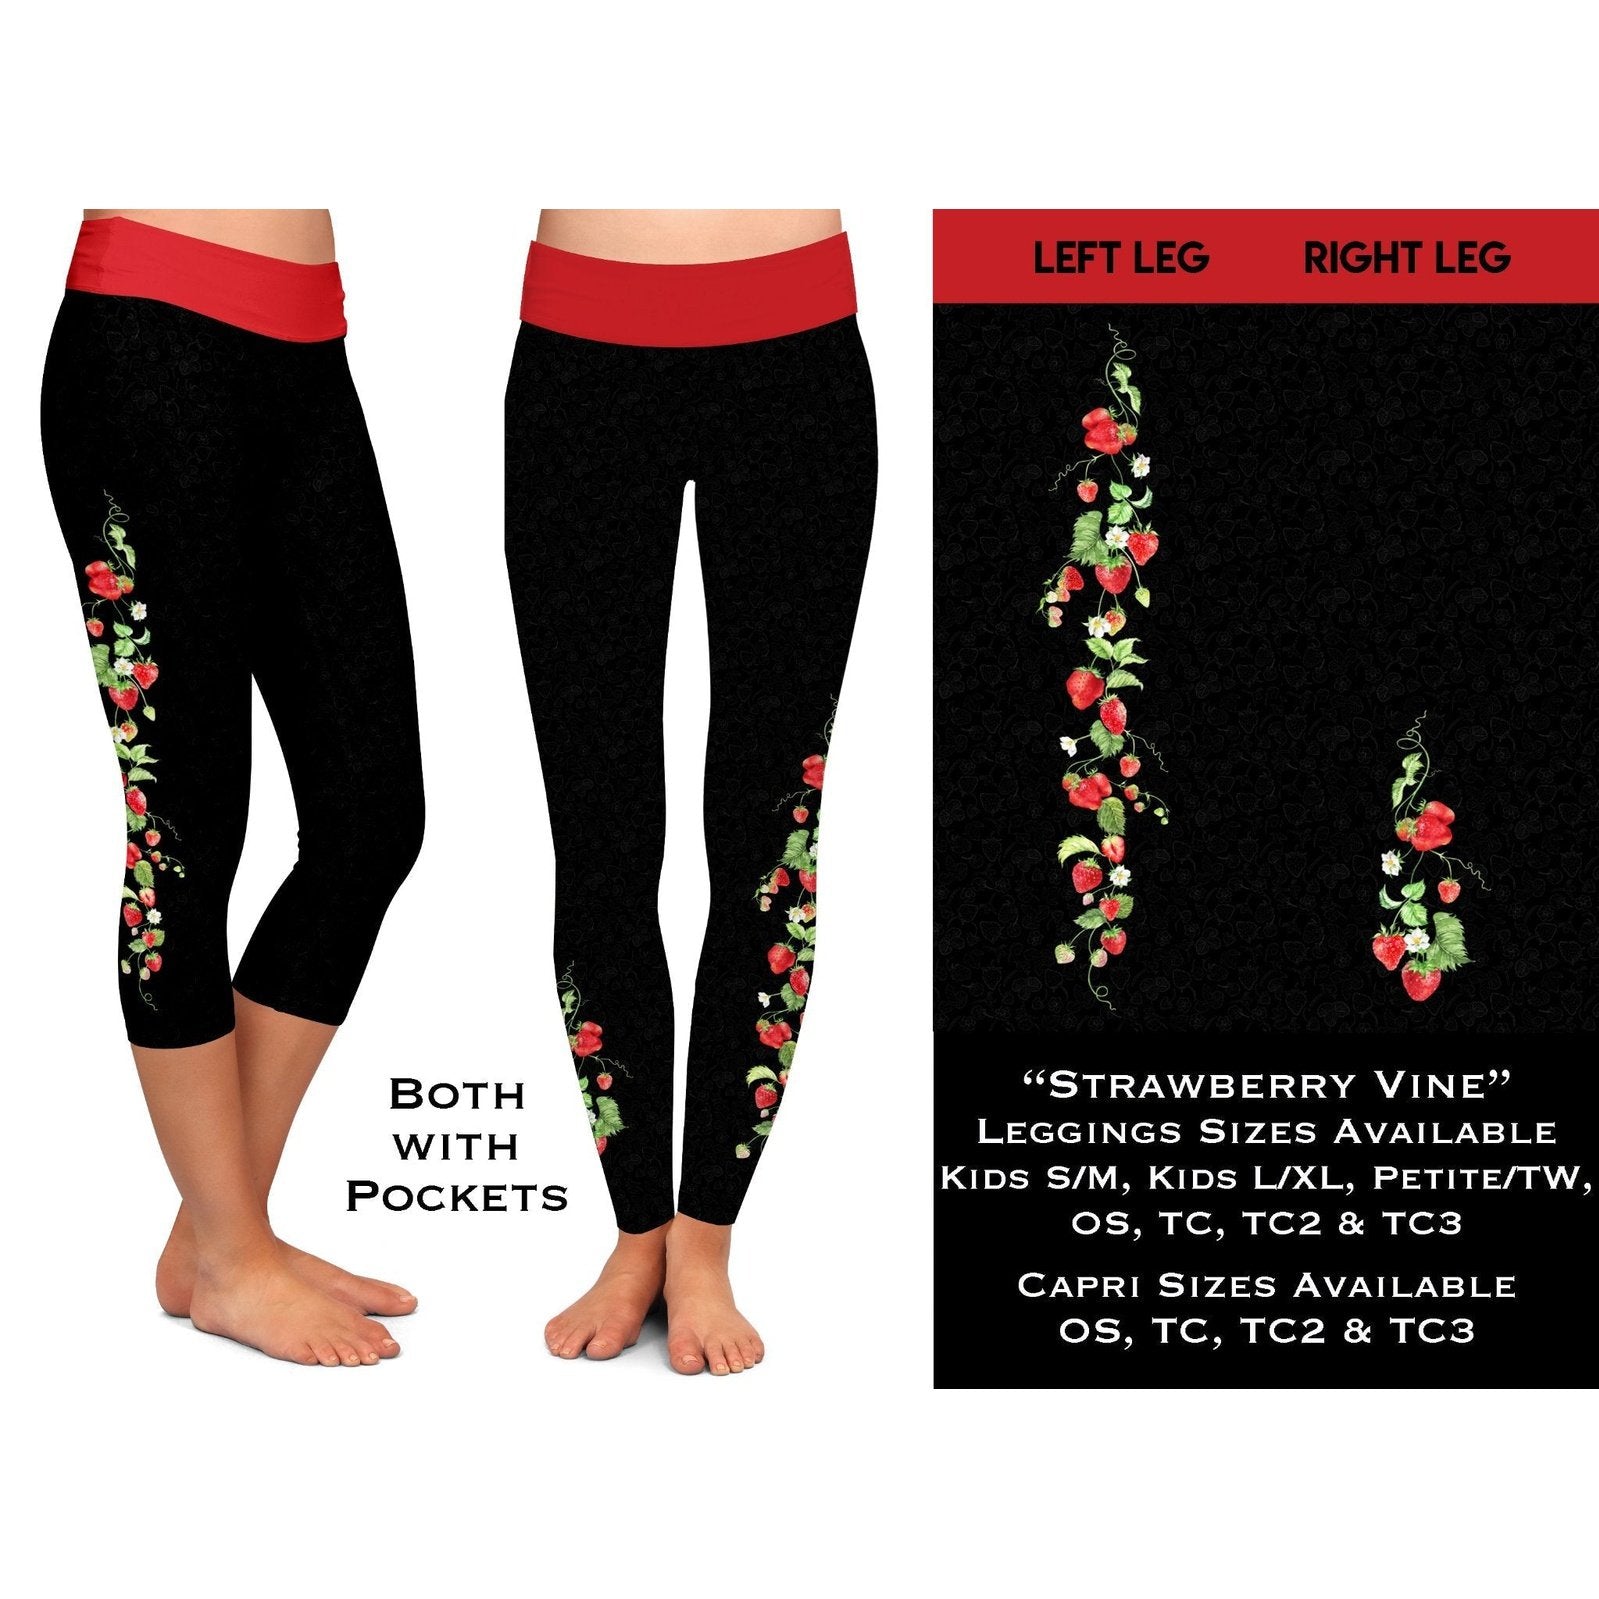 Leggings with Strawberry Vine Side Designs with Pockets